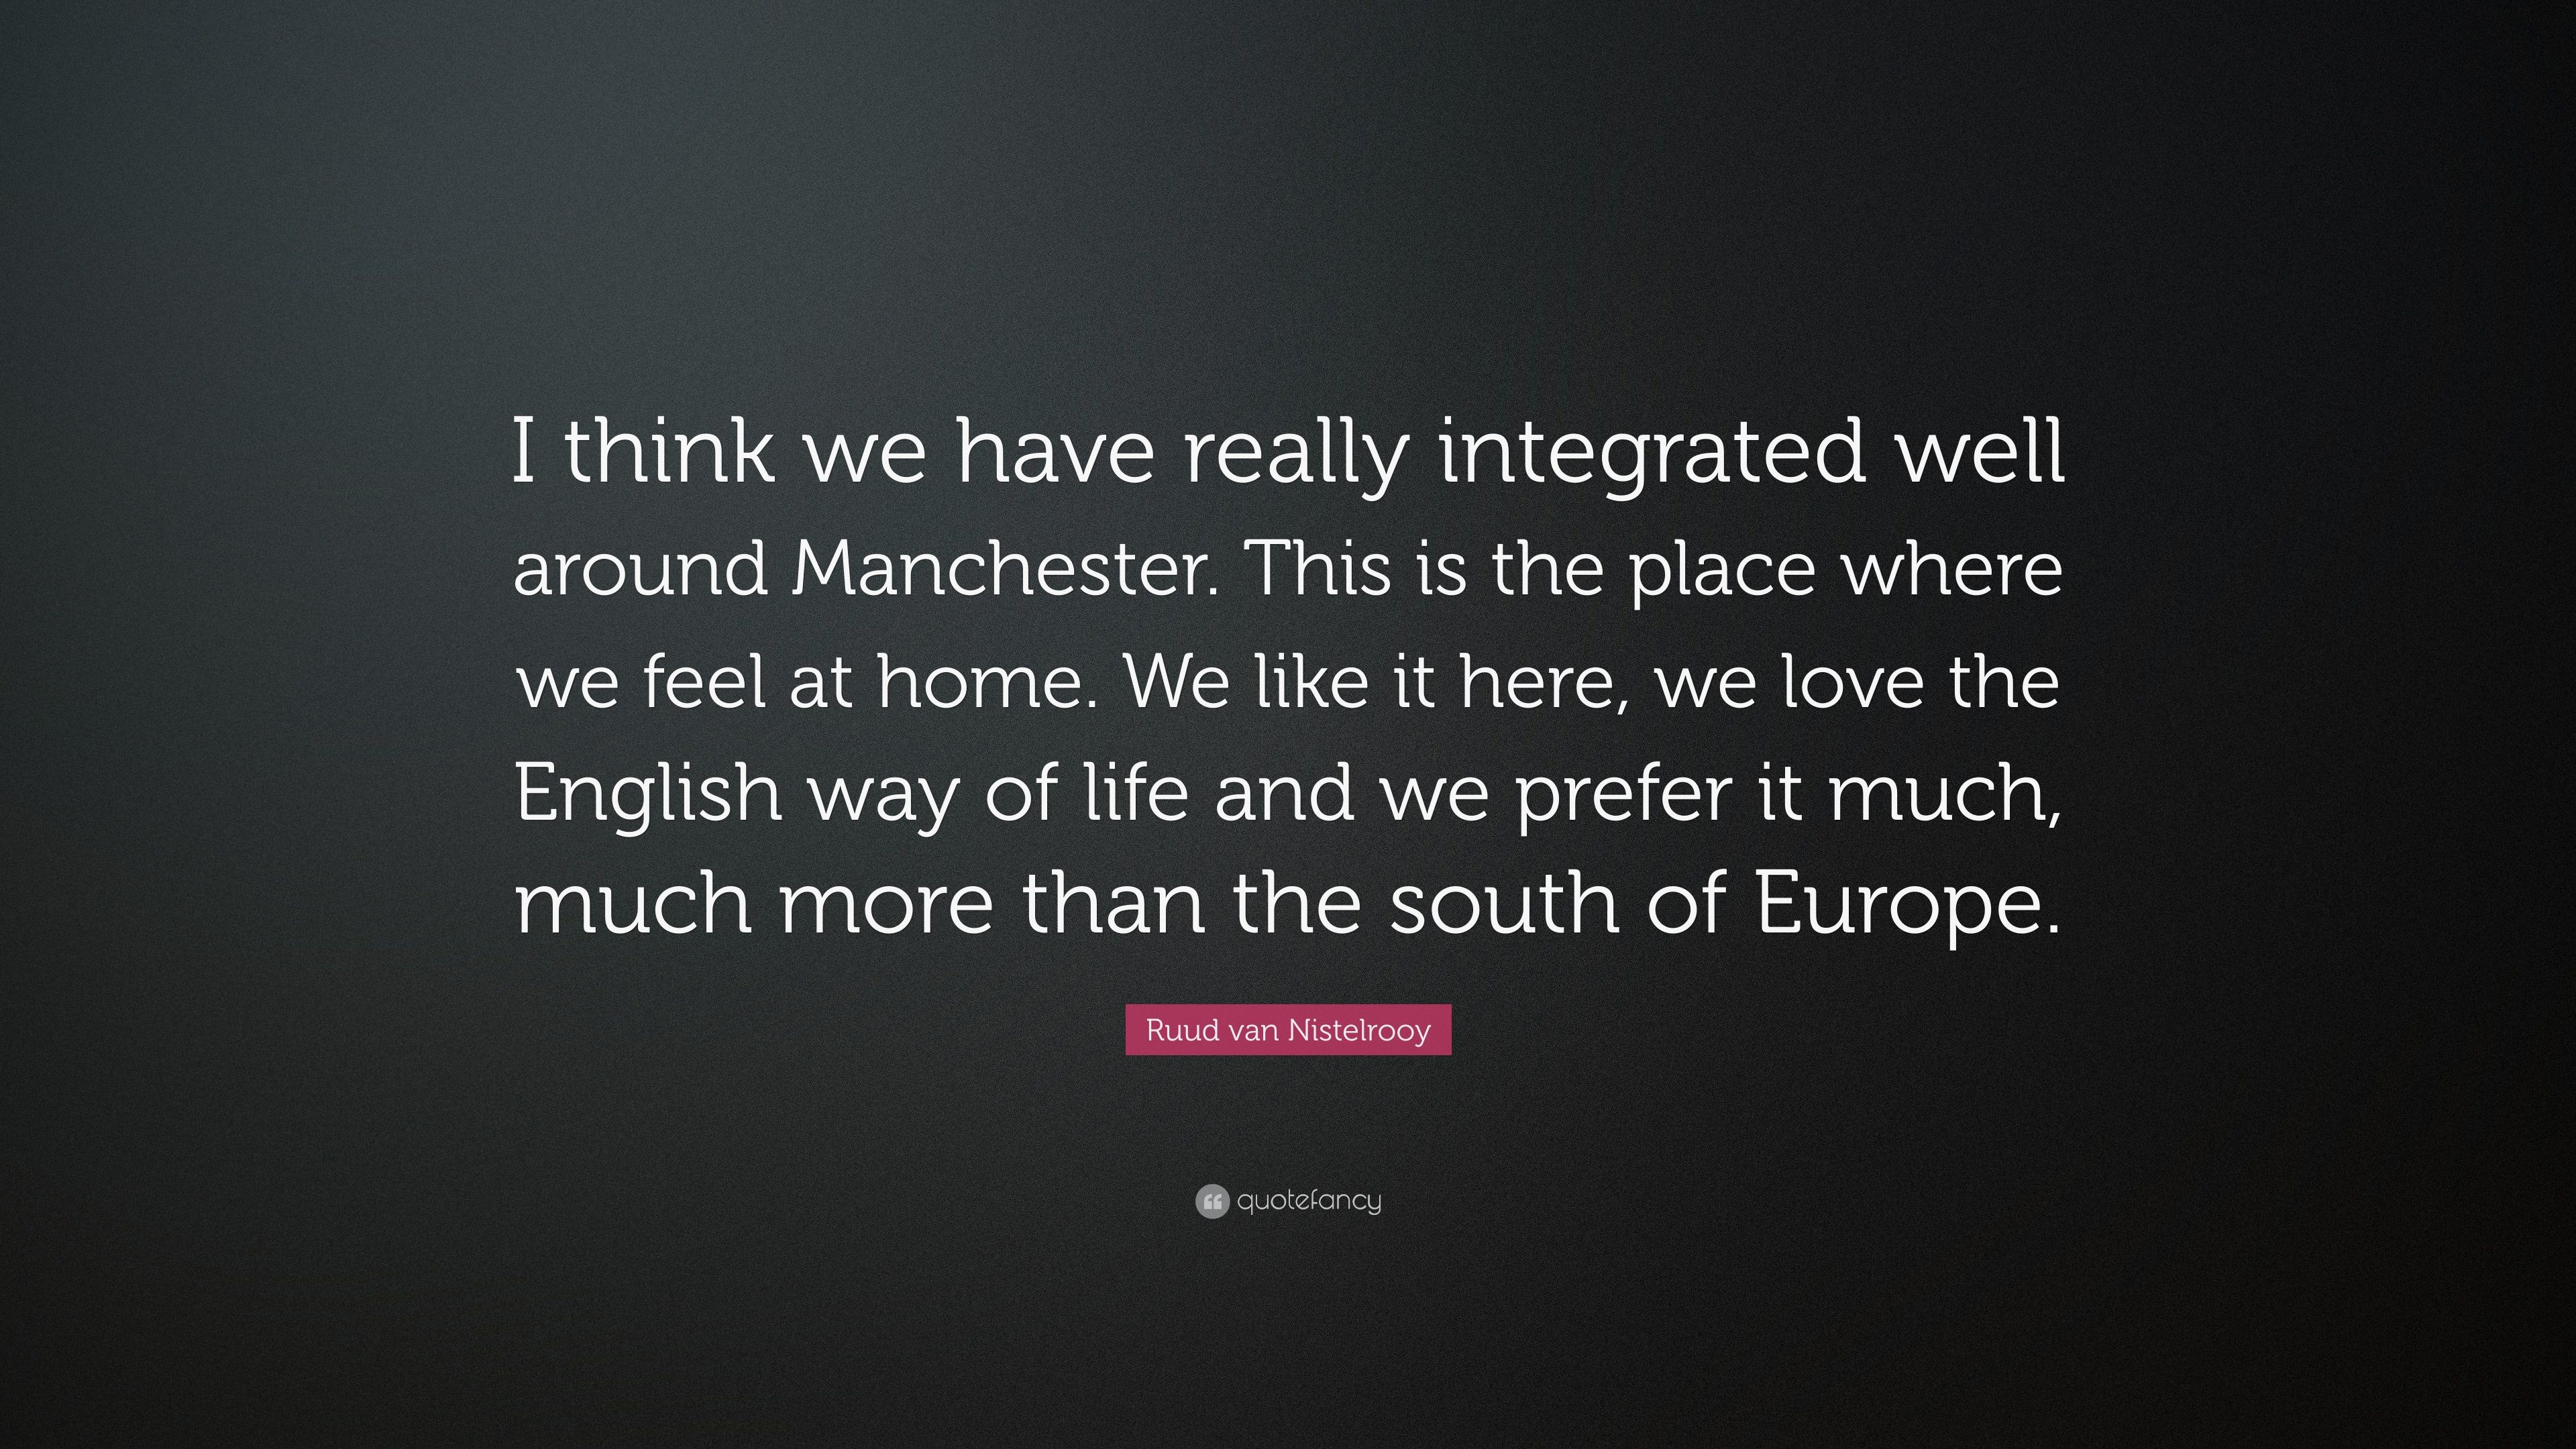 Ruud van Nistelrooy Quote: “I think we have really integrated well